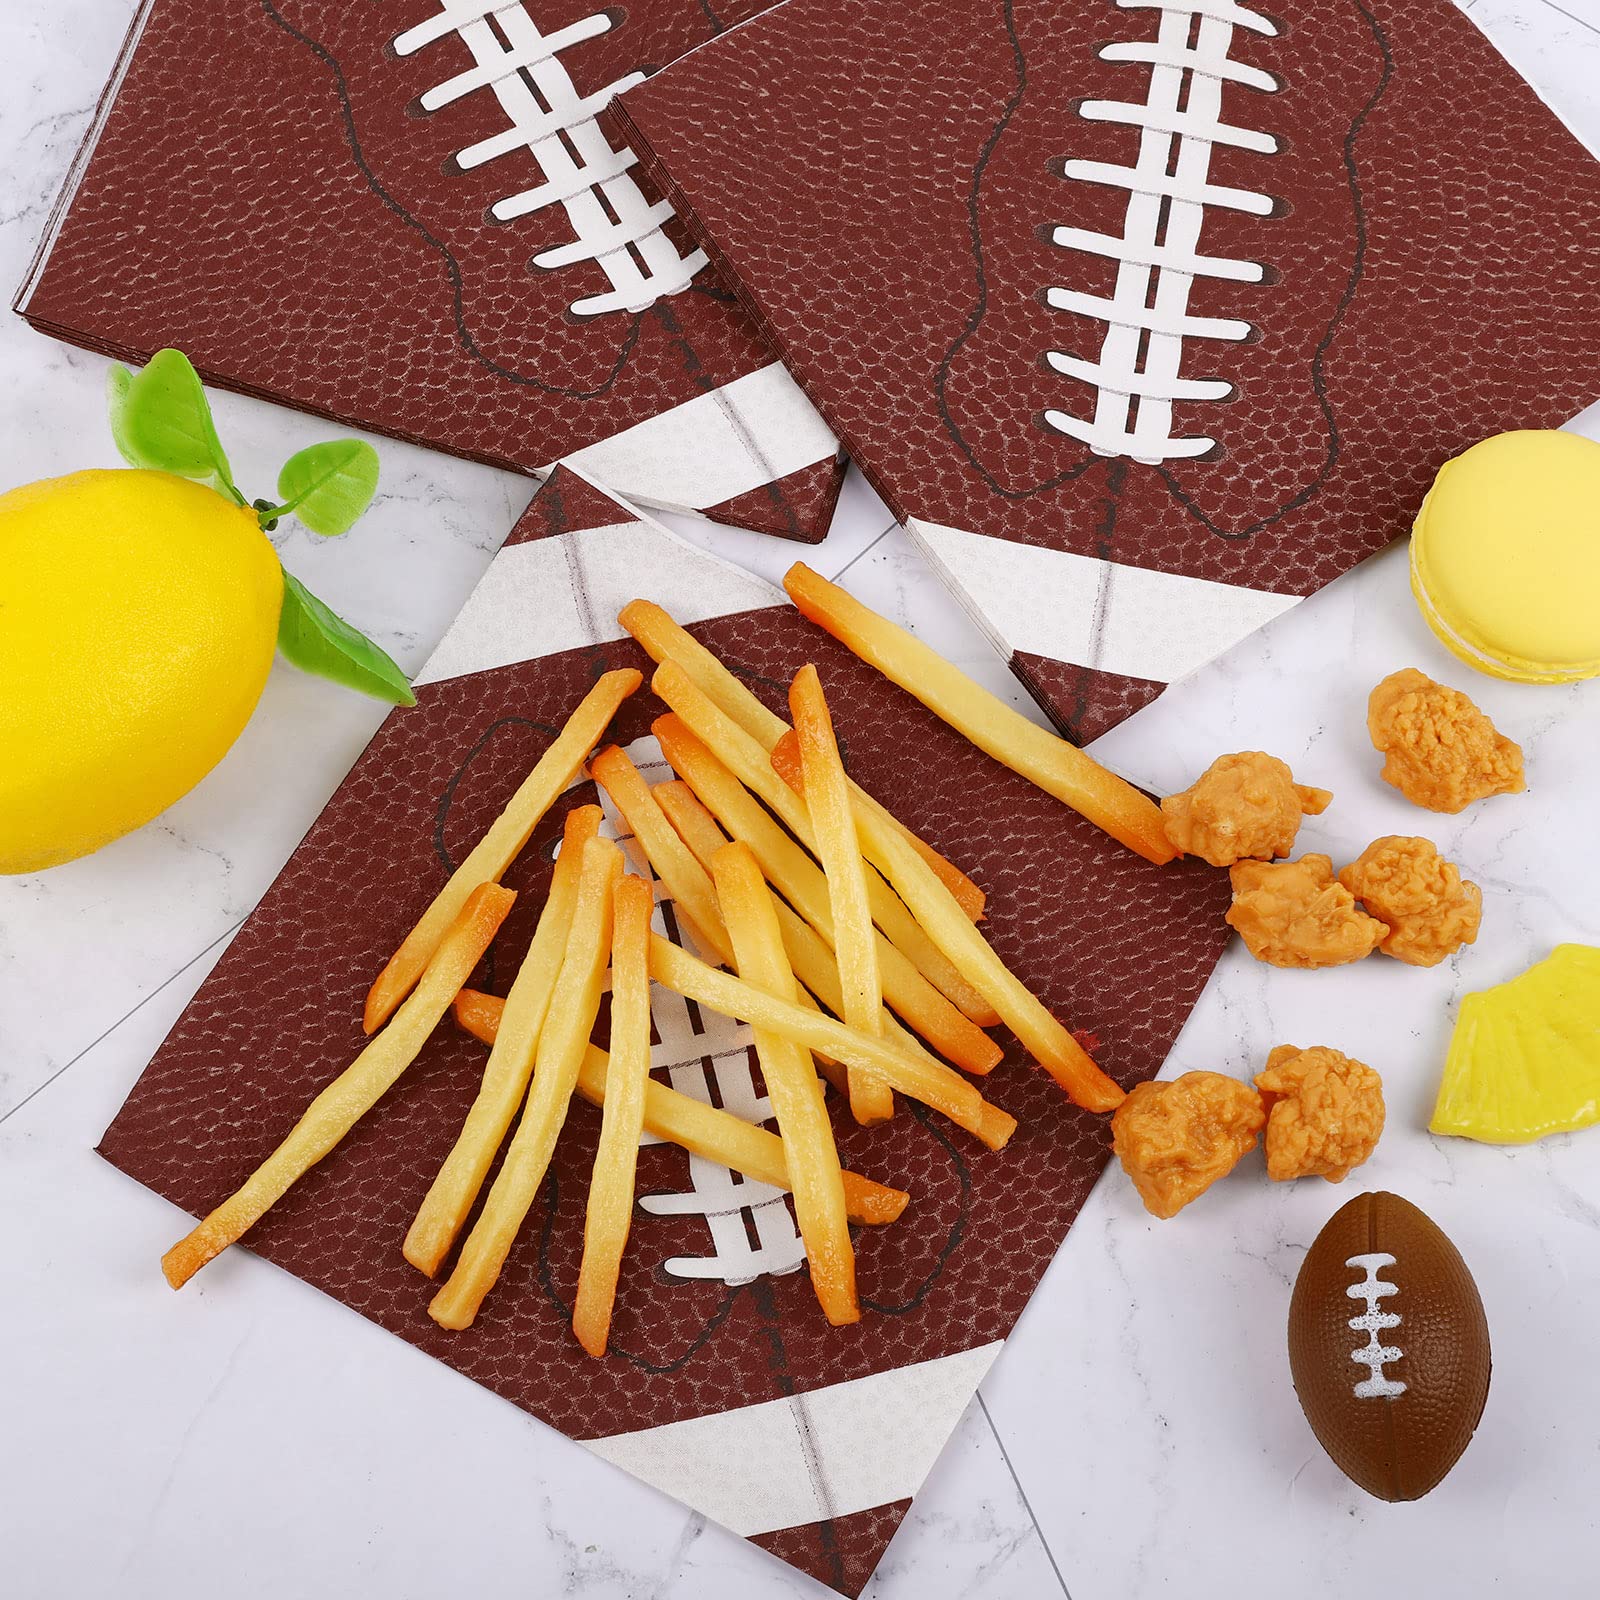 durony 100 Pieces Football Party Napkins 6.5 x 6.5 Inch Football Birthday Party Supplies Disposable Football Paper Napkins for Sports Party Super Bowl Game Day Decorations